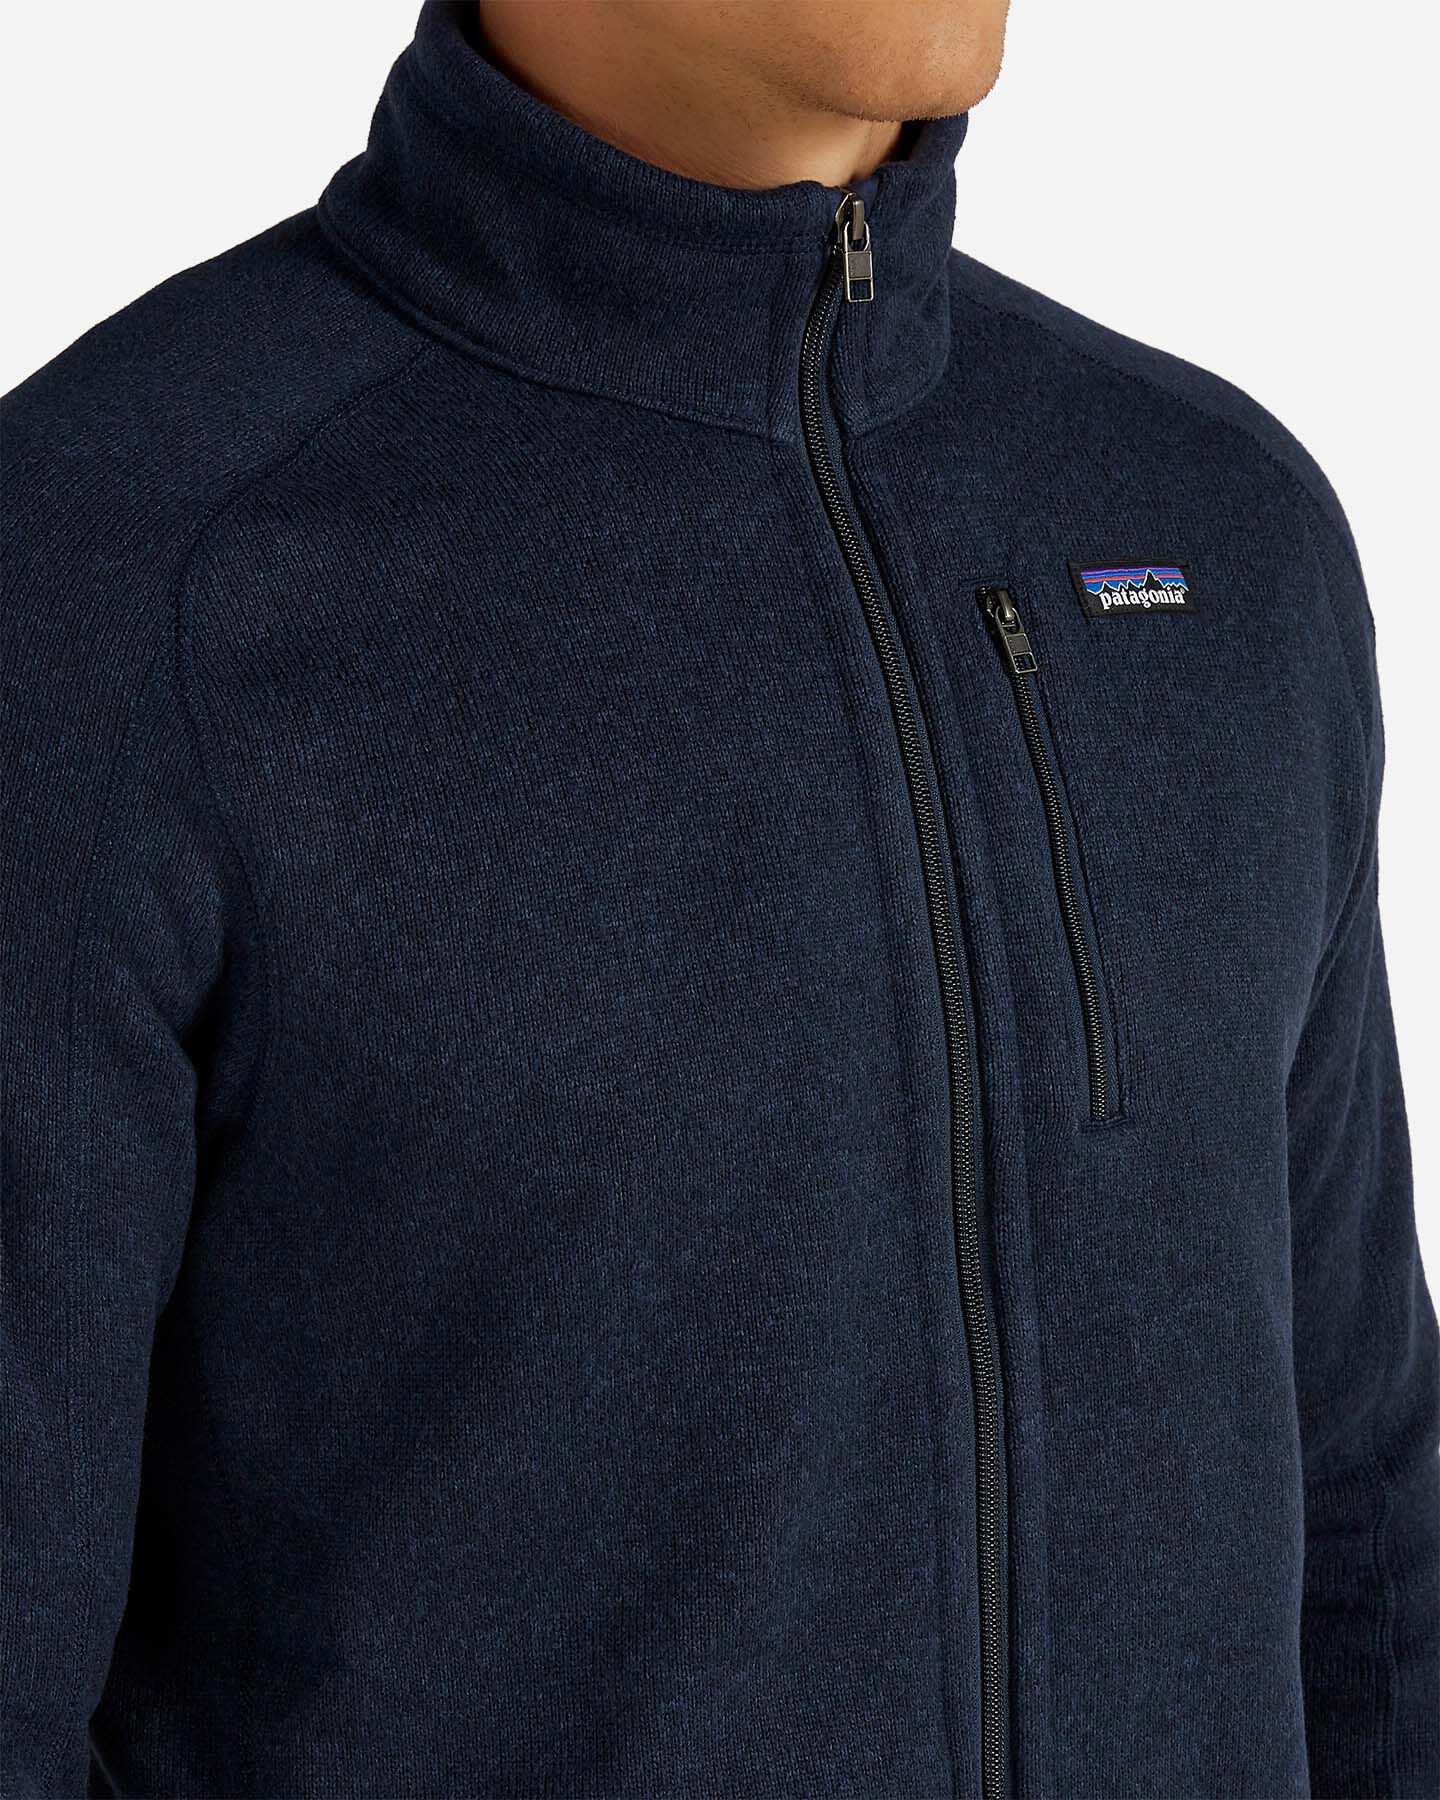  Pile PATAGONIA BETTER SWEATER M S4071094|1|S scatto 4